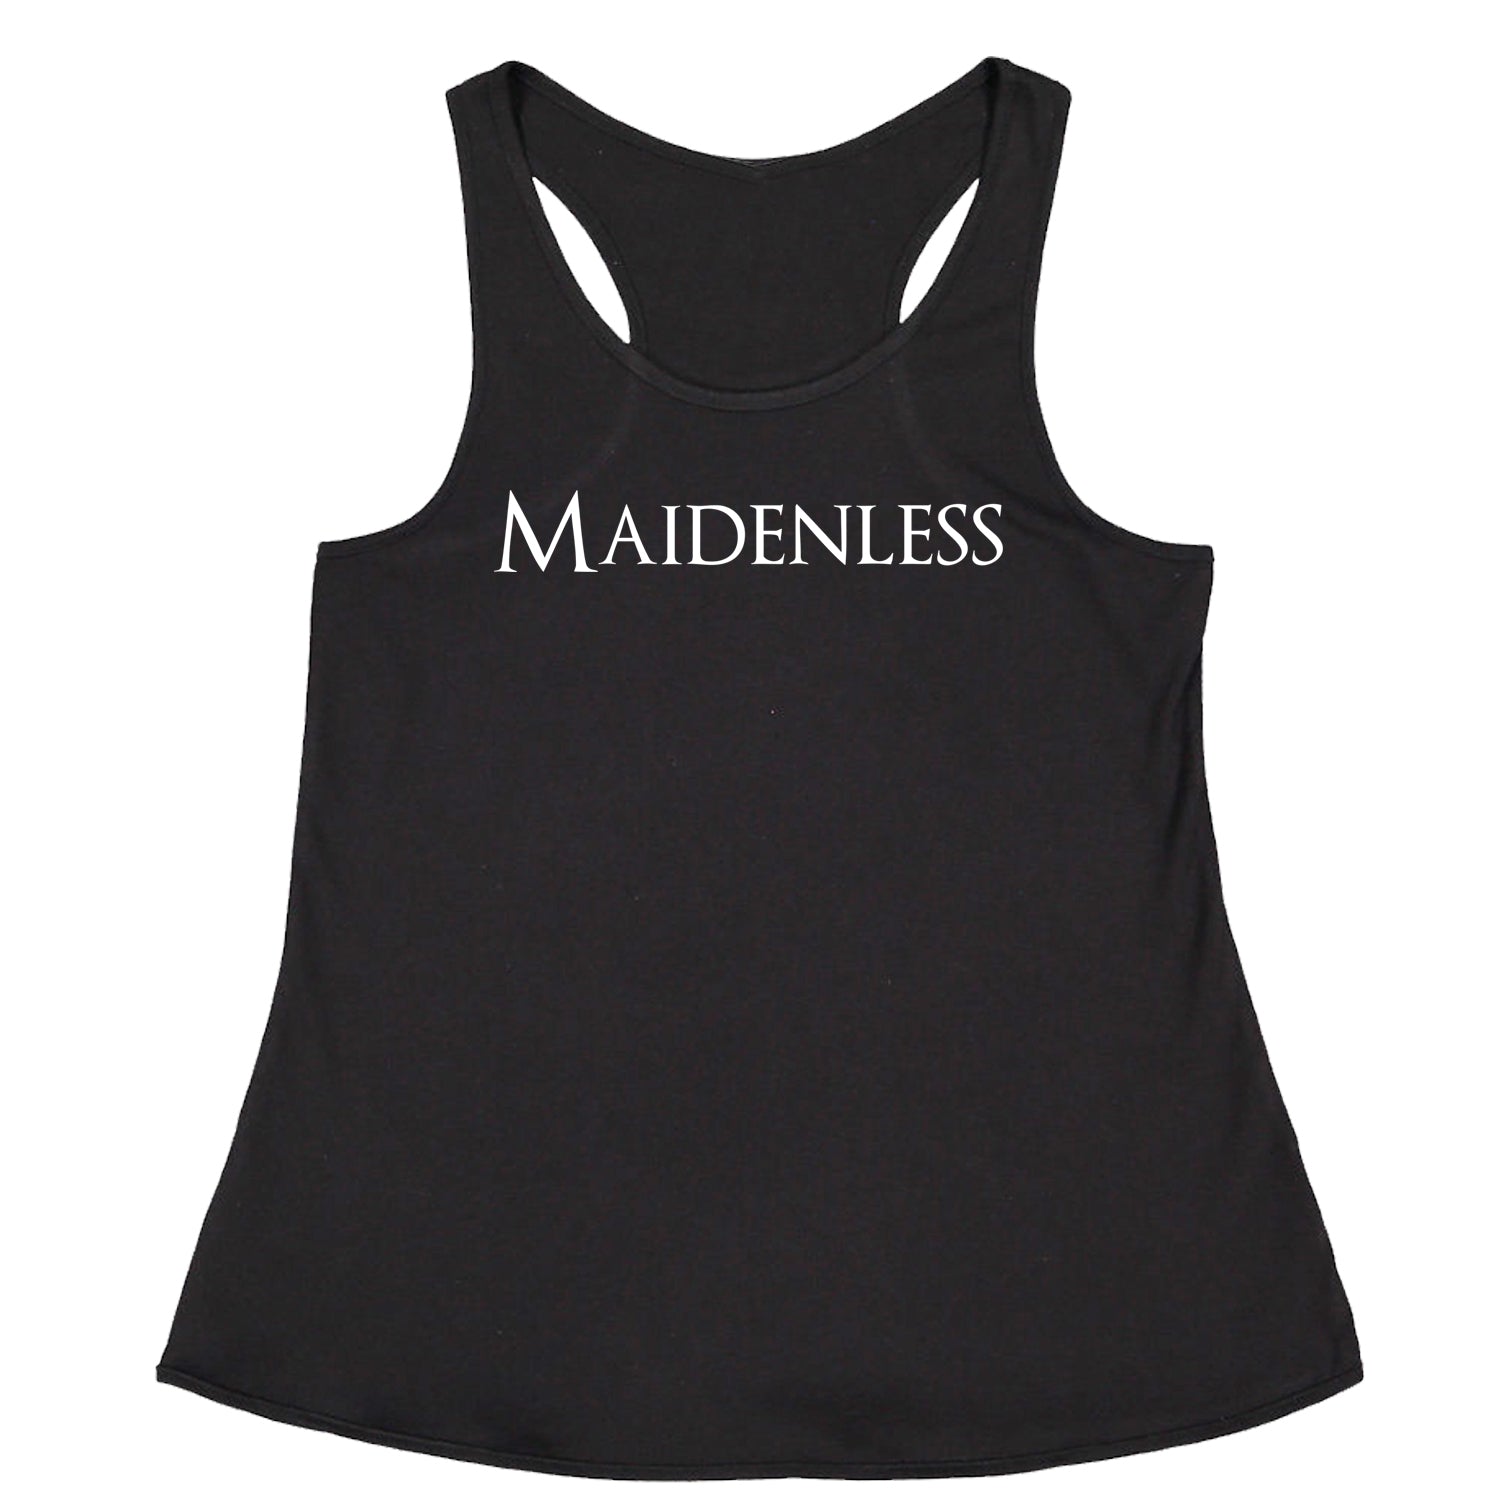 Maidenless Racerback Tank Top for Women elden, game, video by Expression Tees